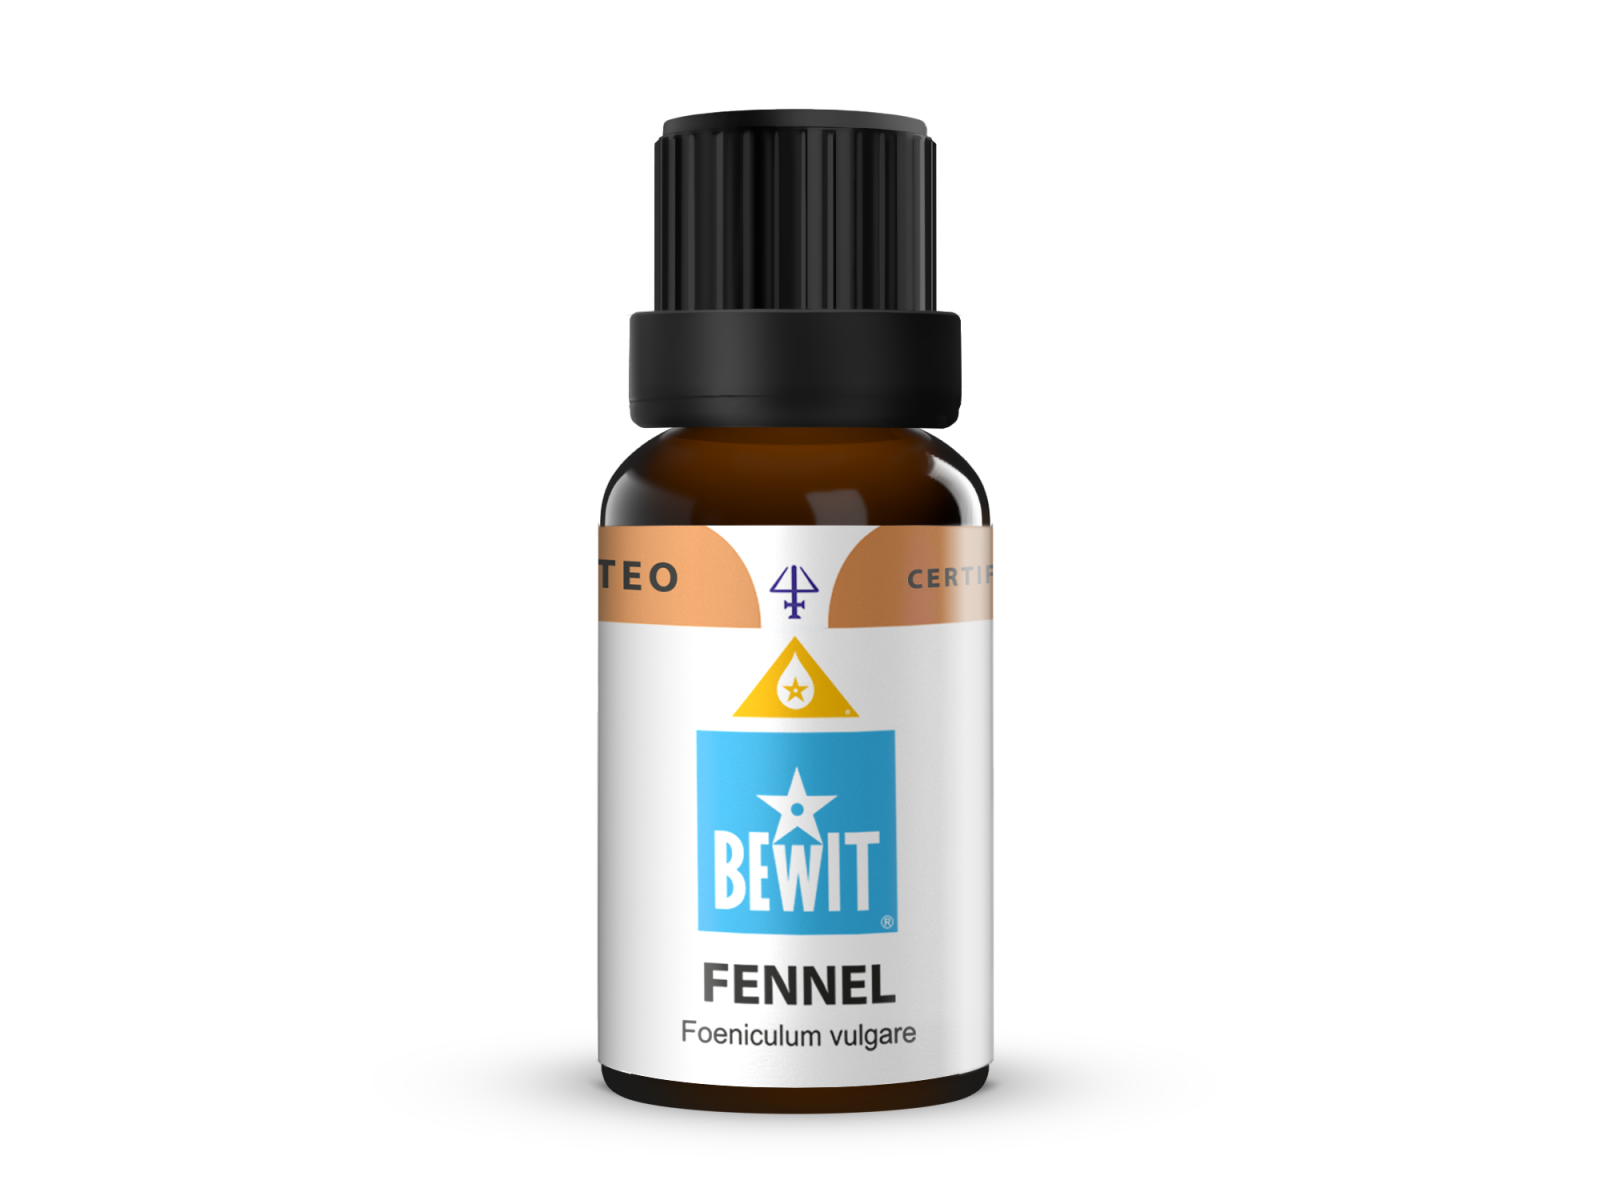 Fennel - This is a 100% pure essential oil - 3